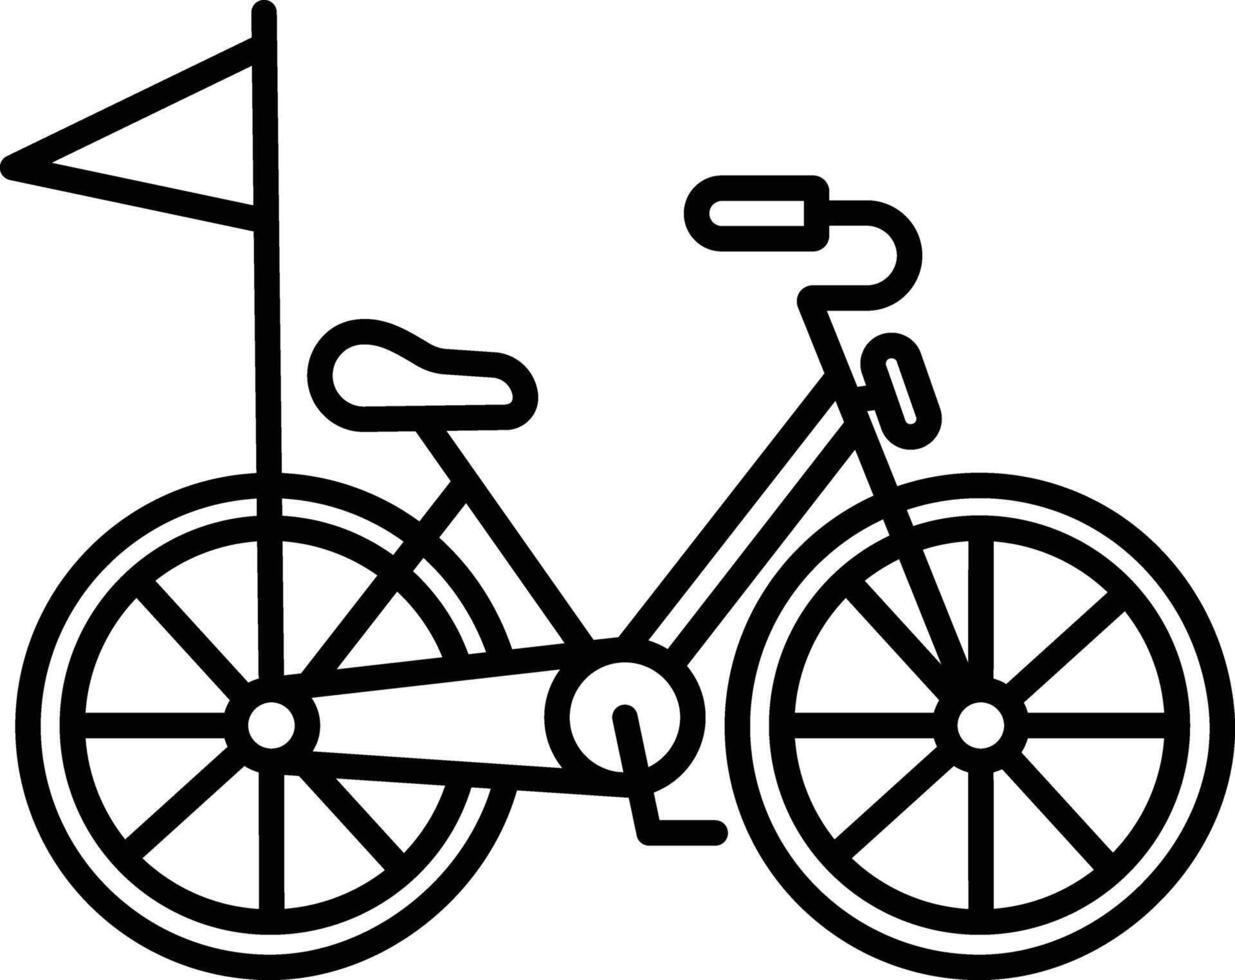 Bicycle outline illustration vector